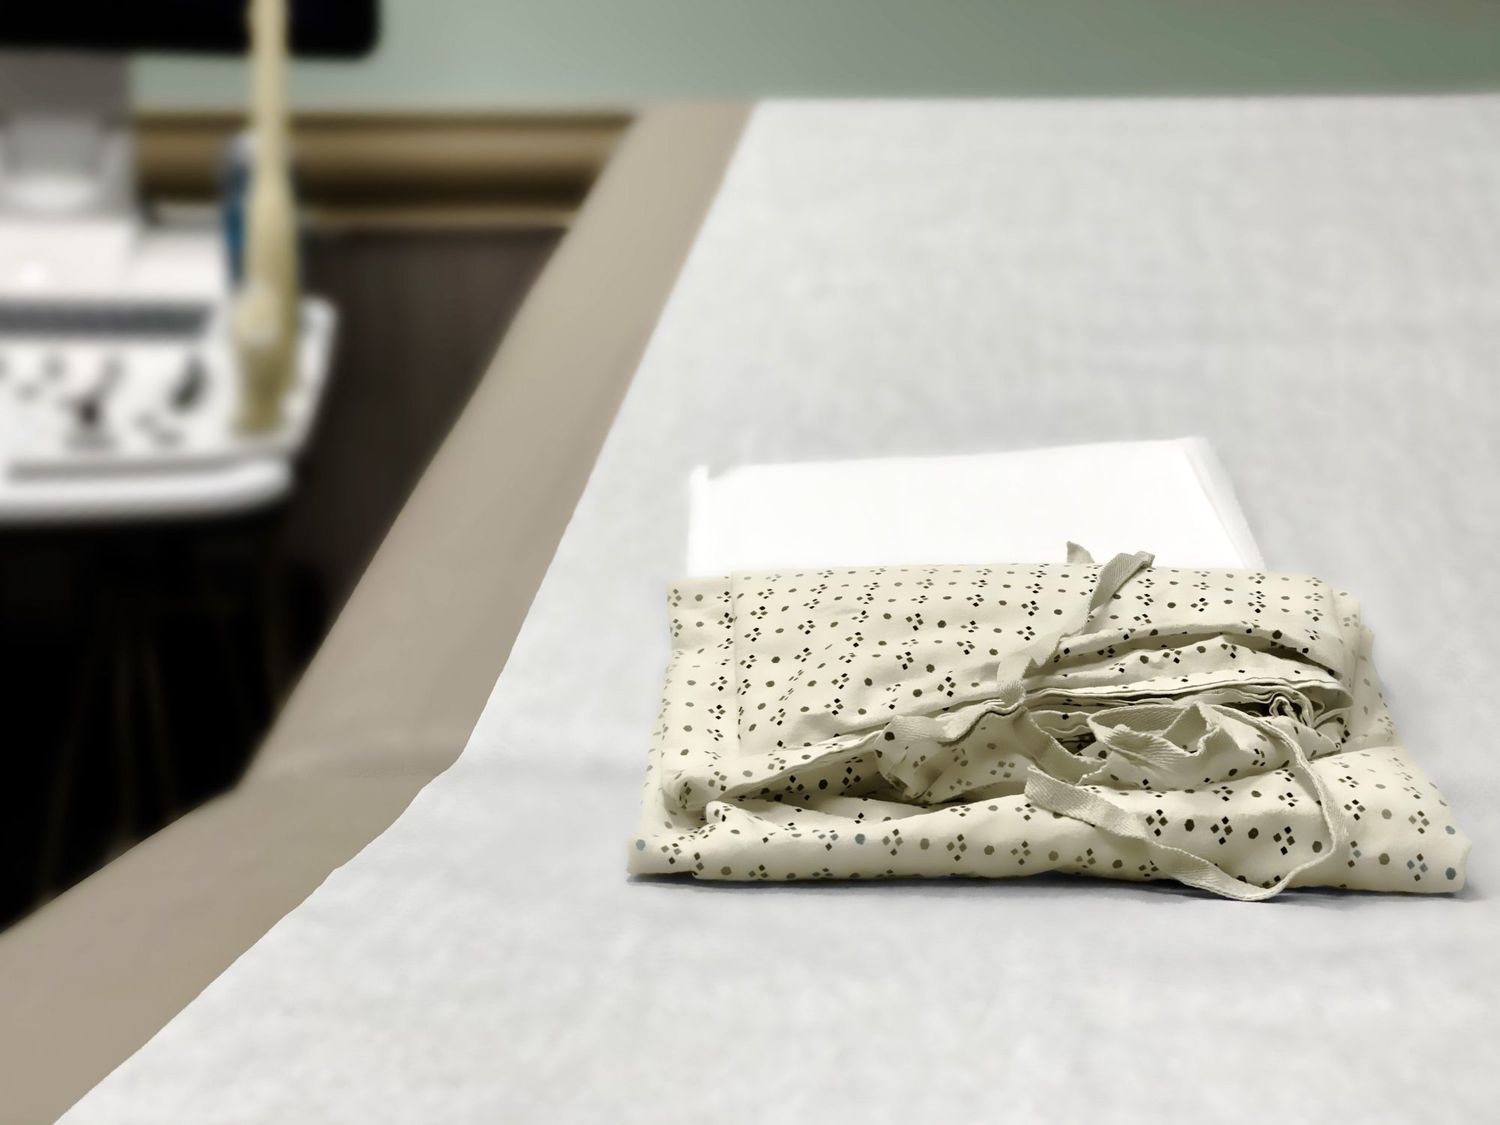 An image of a medical examination table in a gynecologist office.